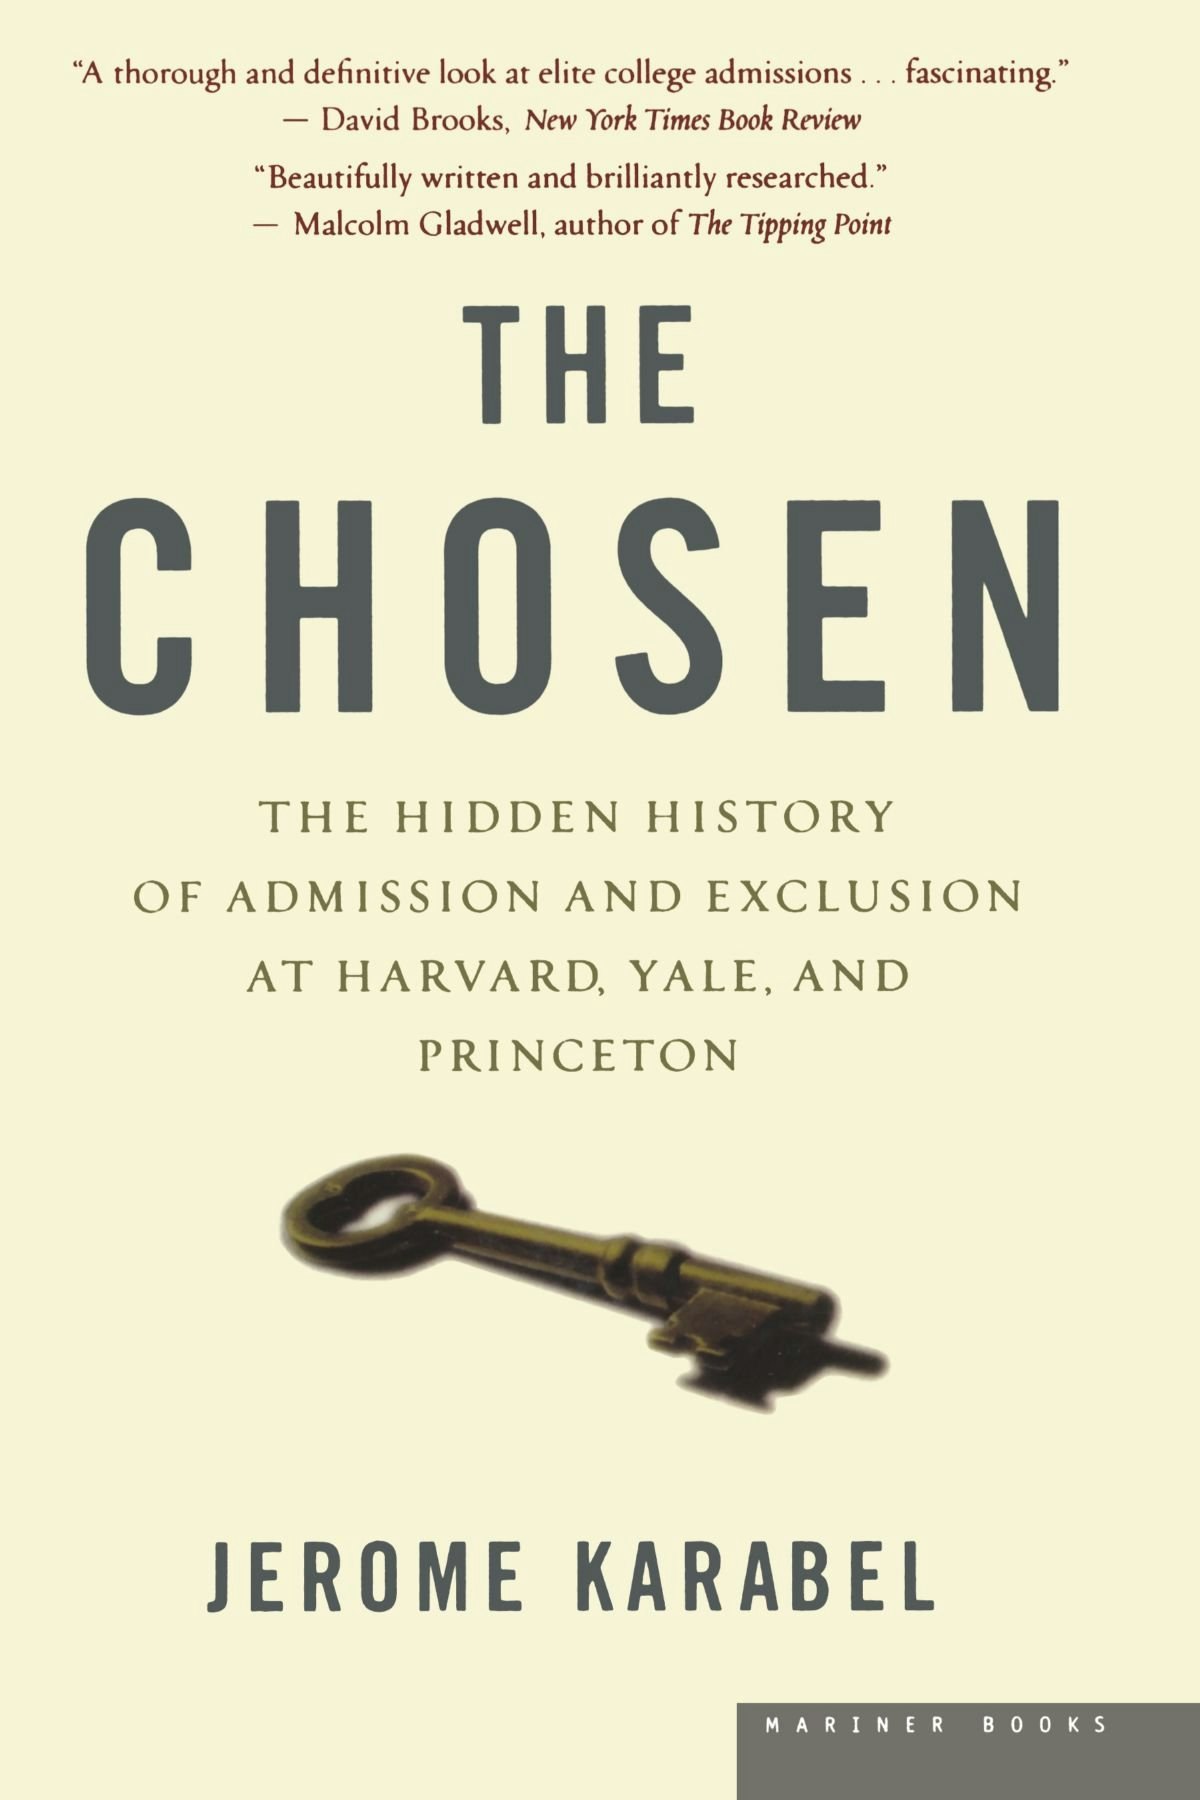 The Price of Admission by Daniel Golden